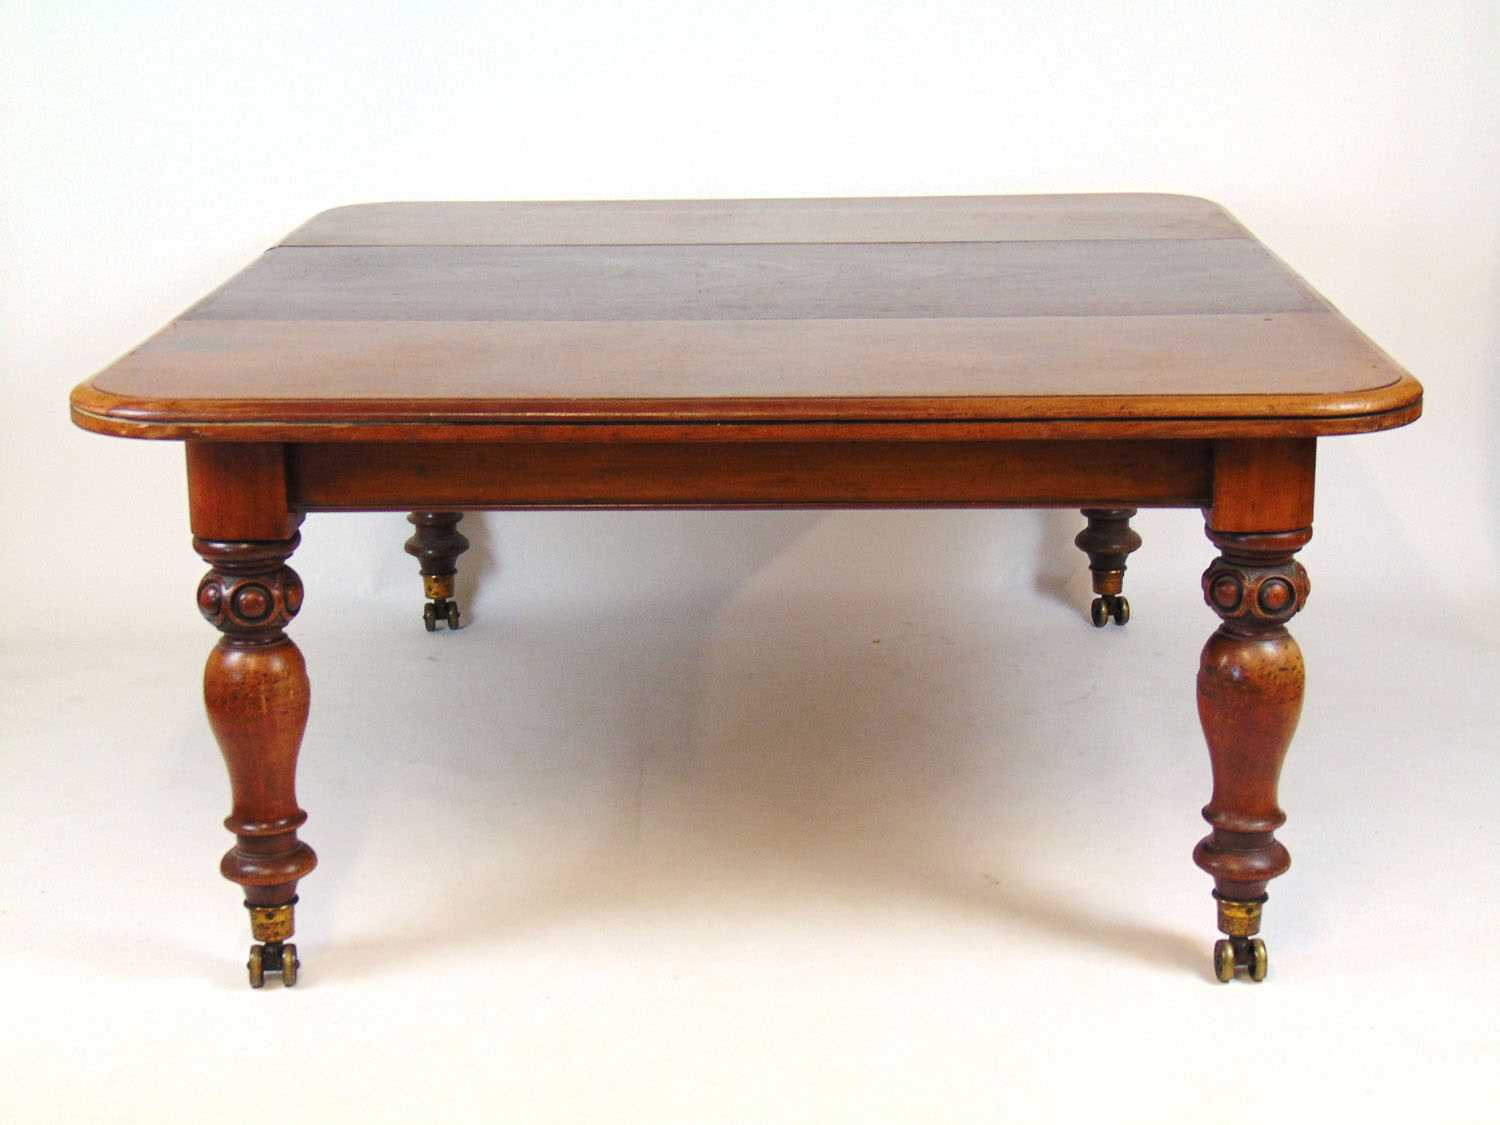 A Victorian mahogany extending dining table, the moulded top on pull-out mechanism with three leaf's